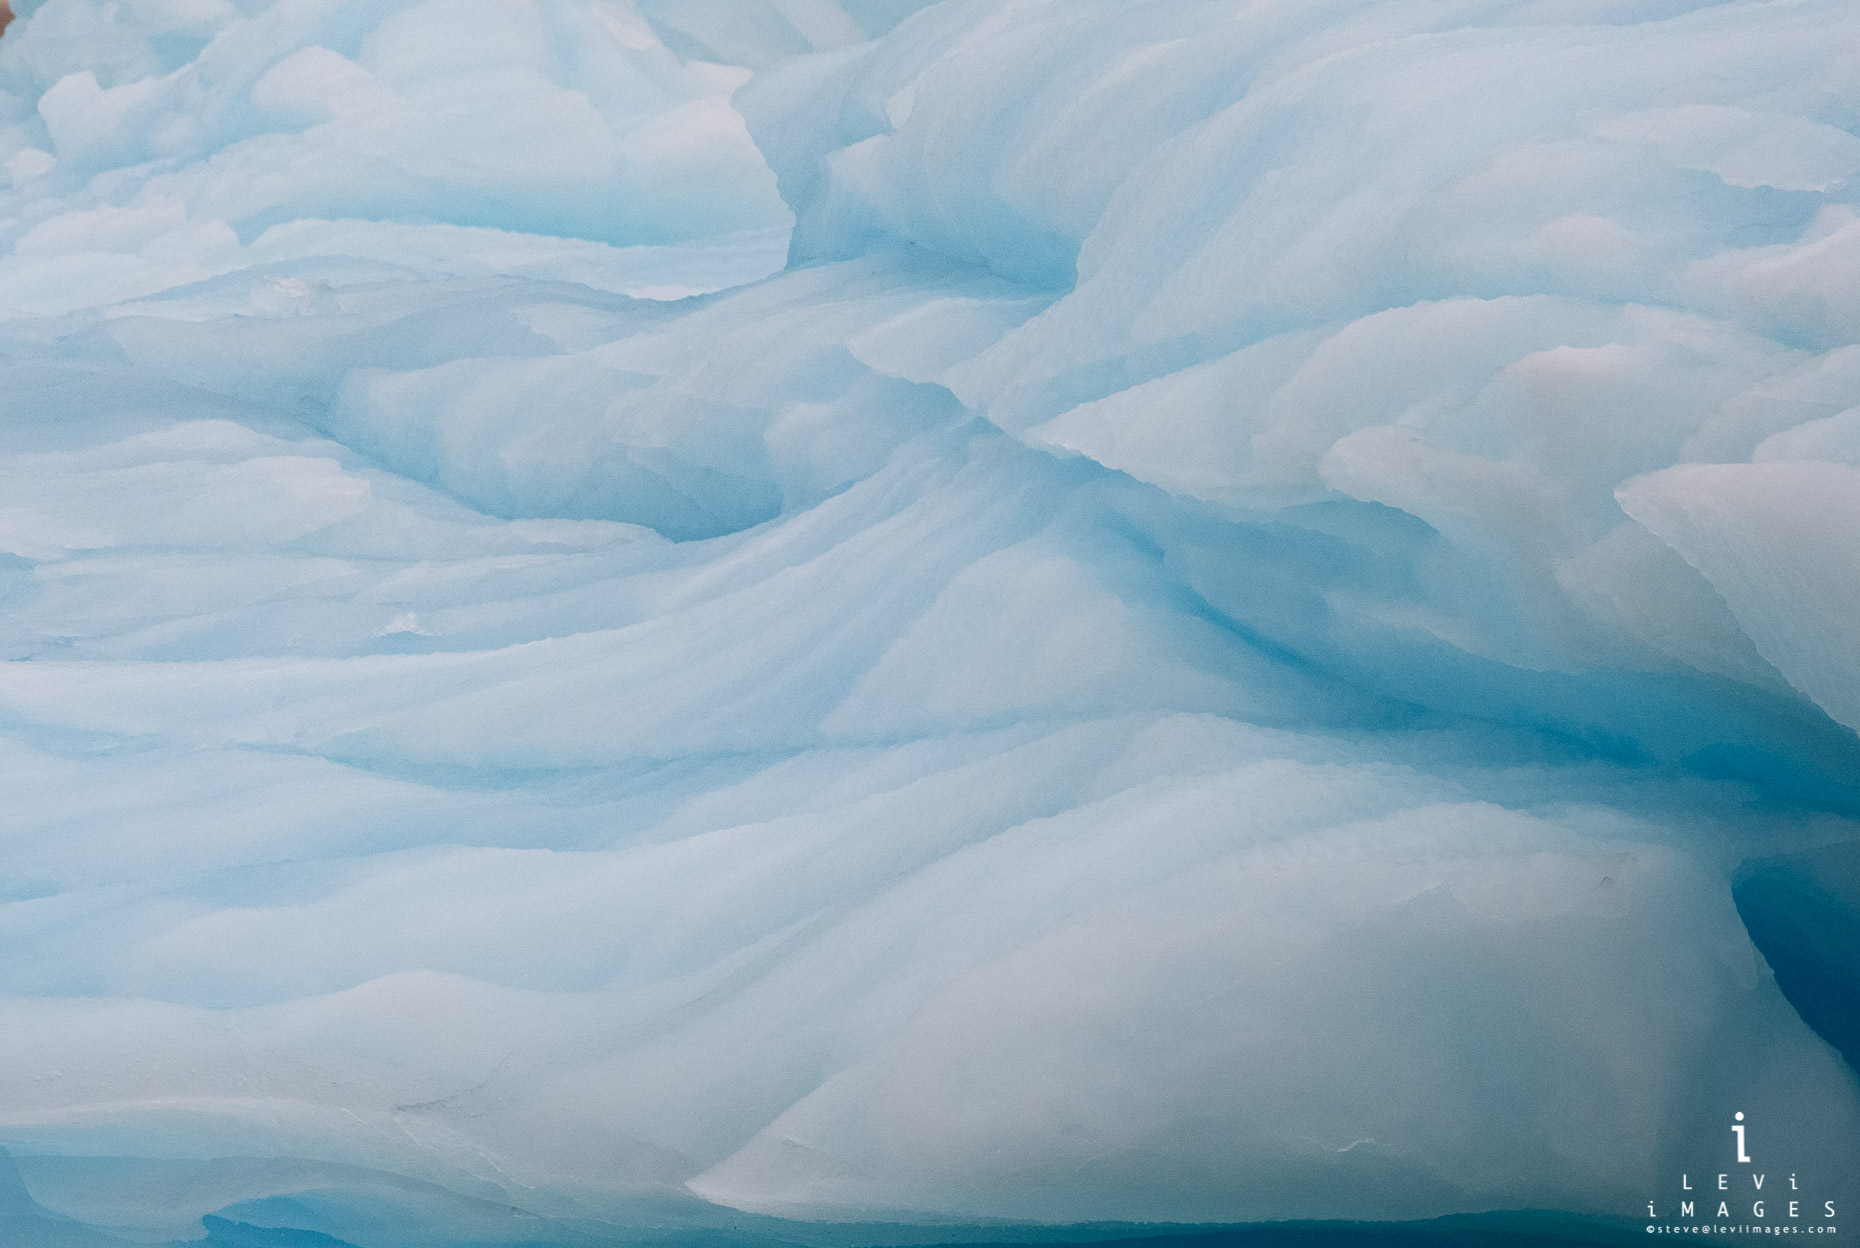 Ice abstract waves. Svalbard, Norway